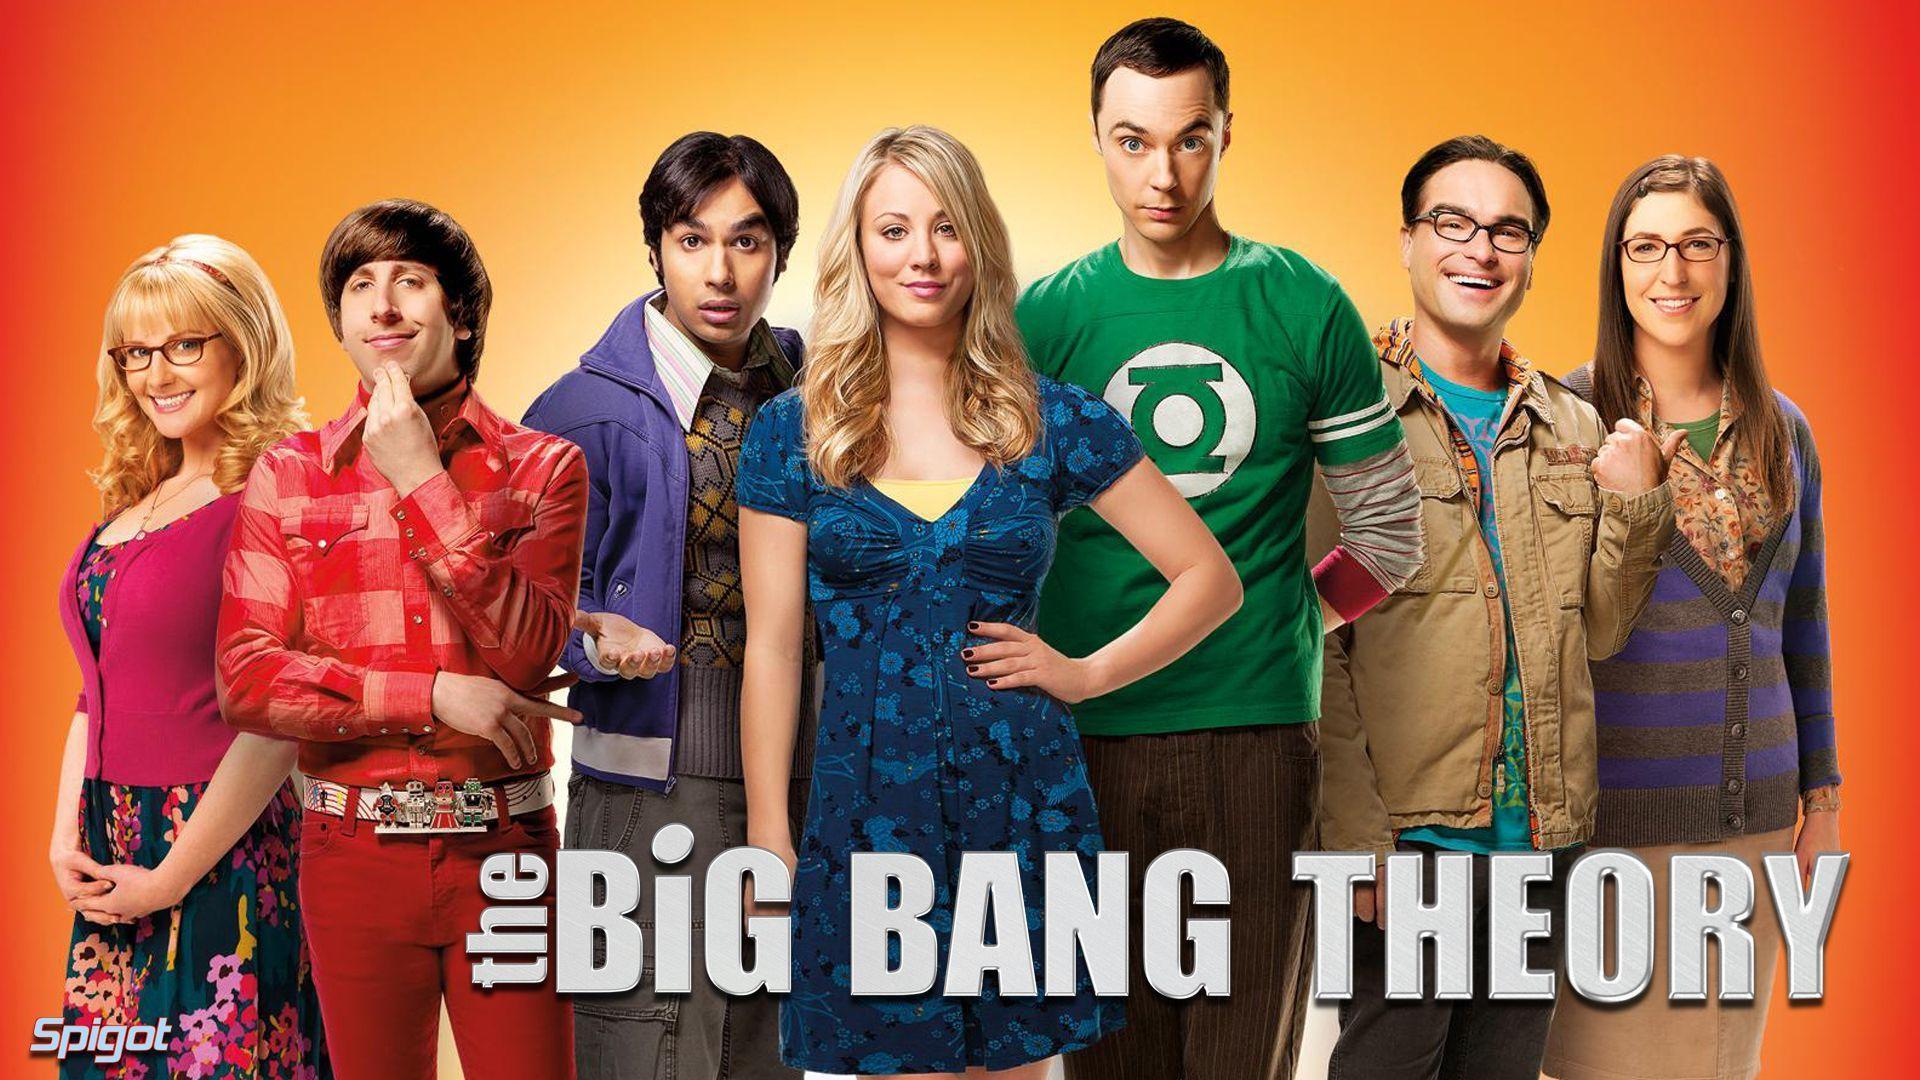 The Big Bang Theory 10x01 "The Conjugal Conjecture" Synopsis